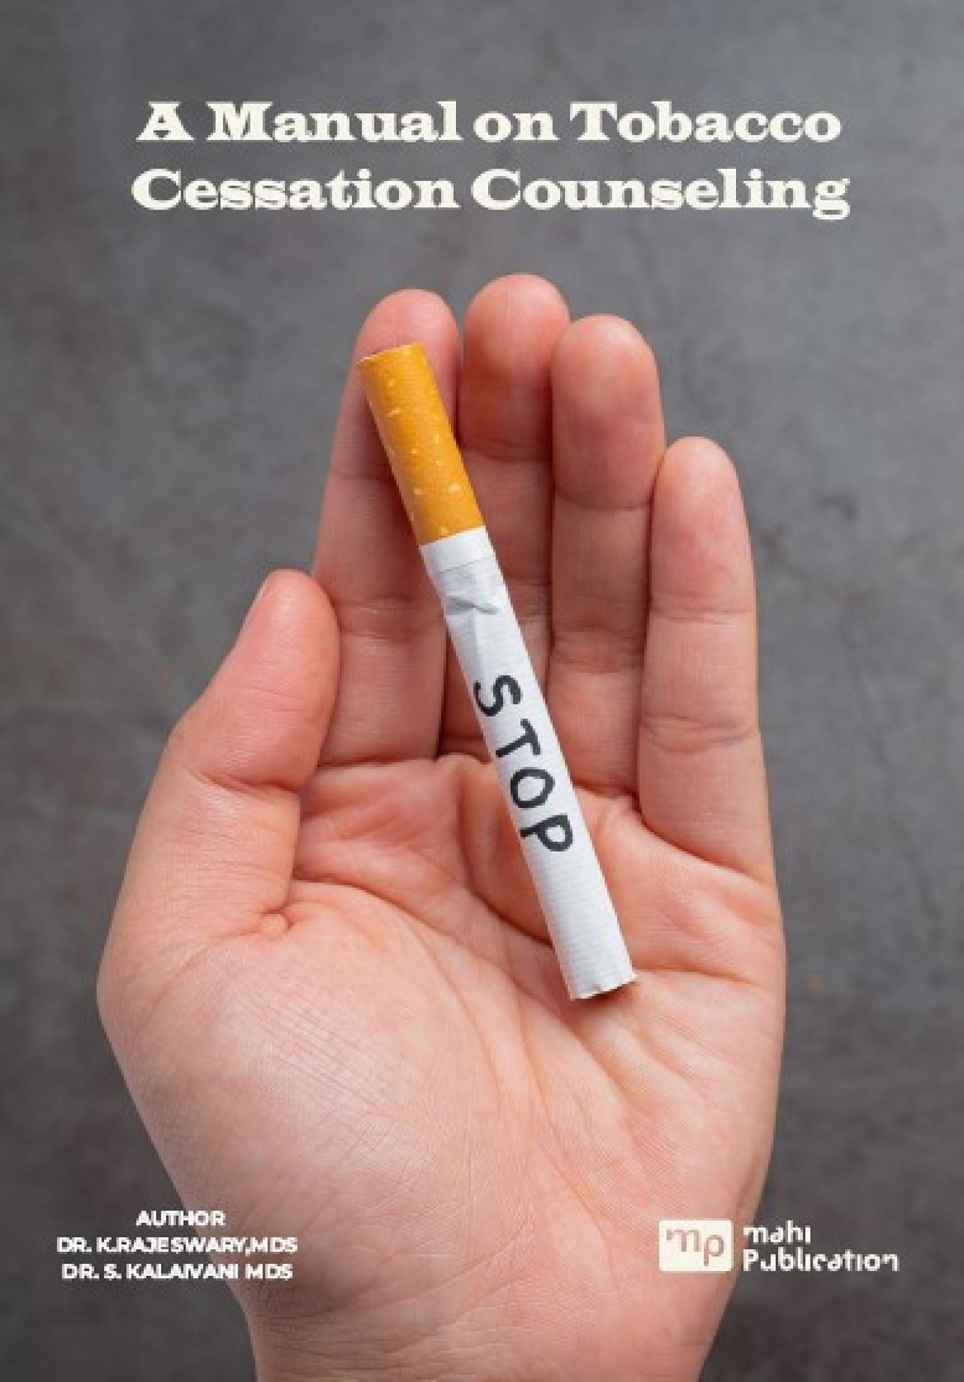 A Manual on Tobacco Cessation Counseling